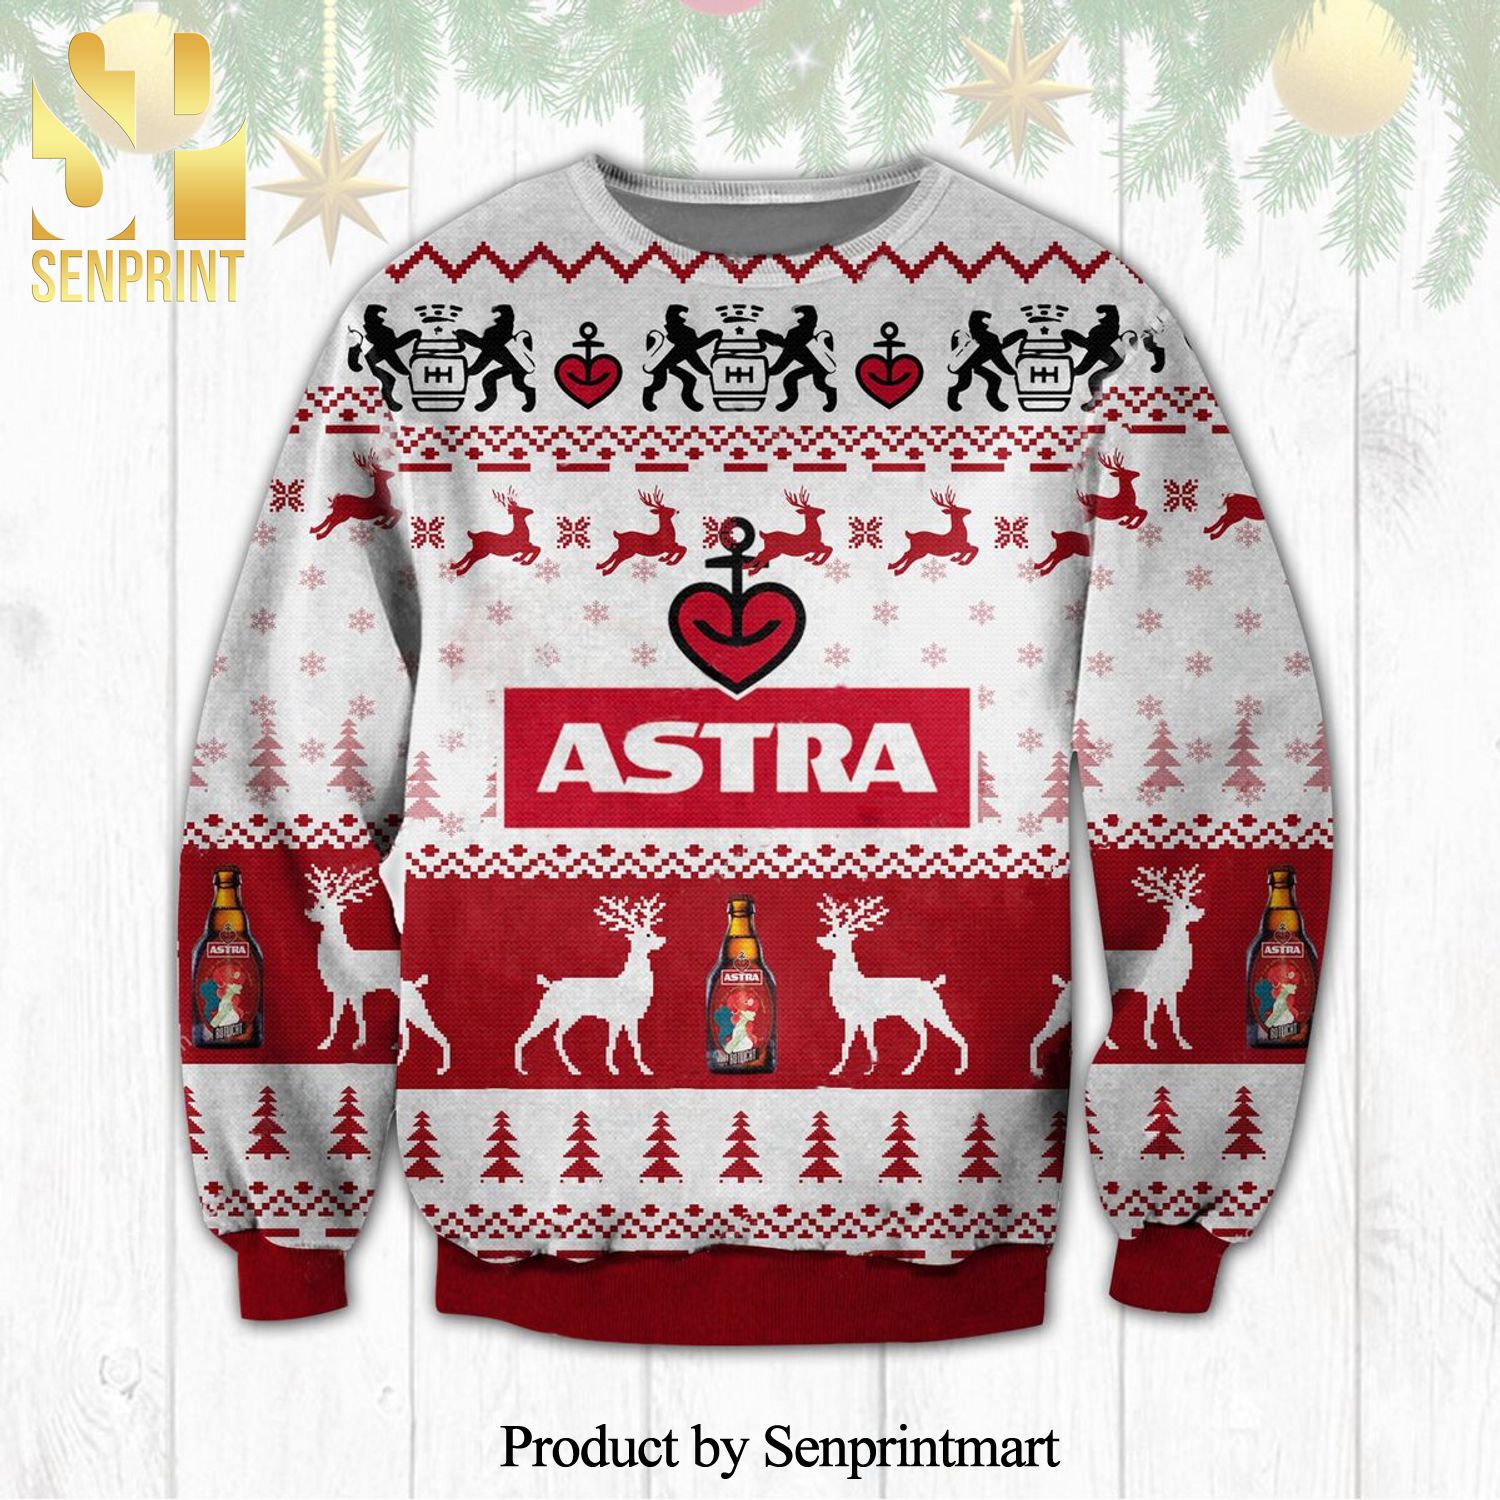 Astra Bier Beer Logo Knitted Ugly Christmas Sweater